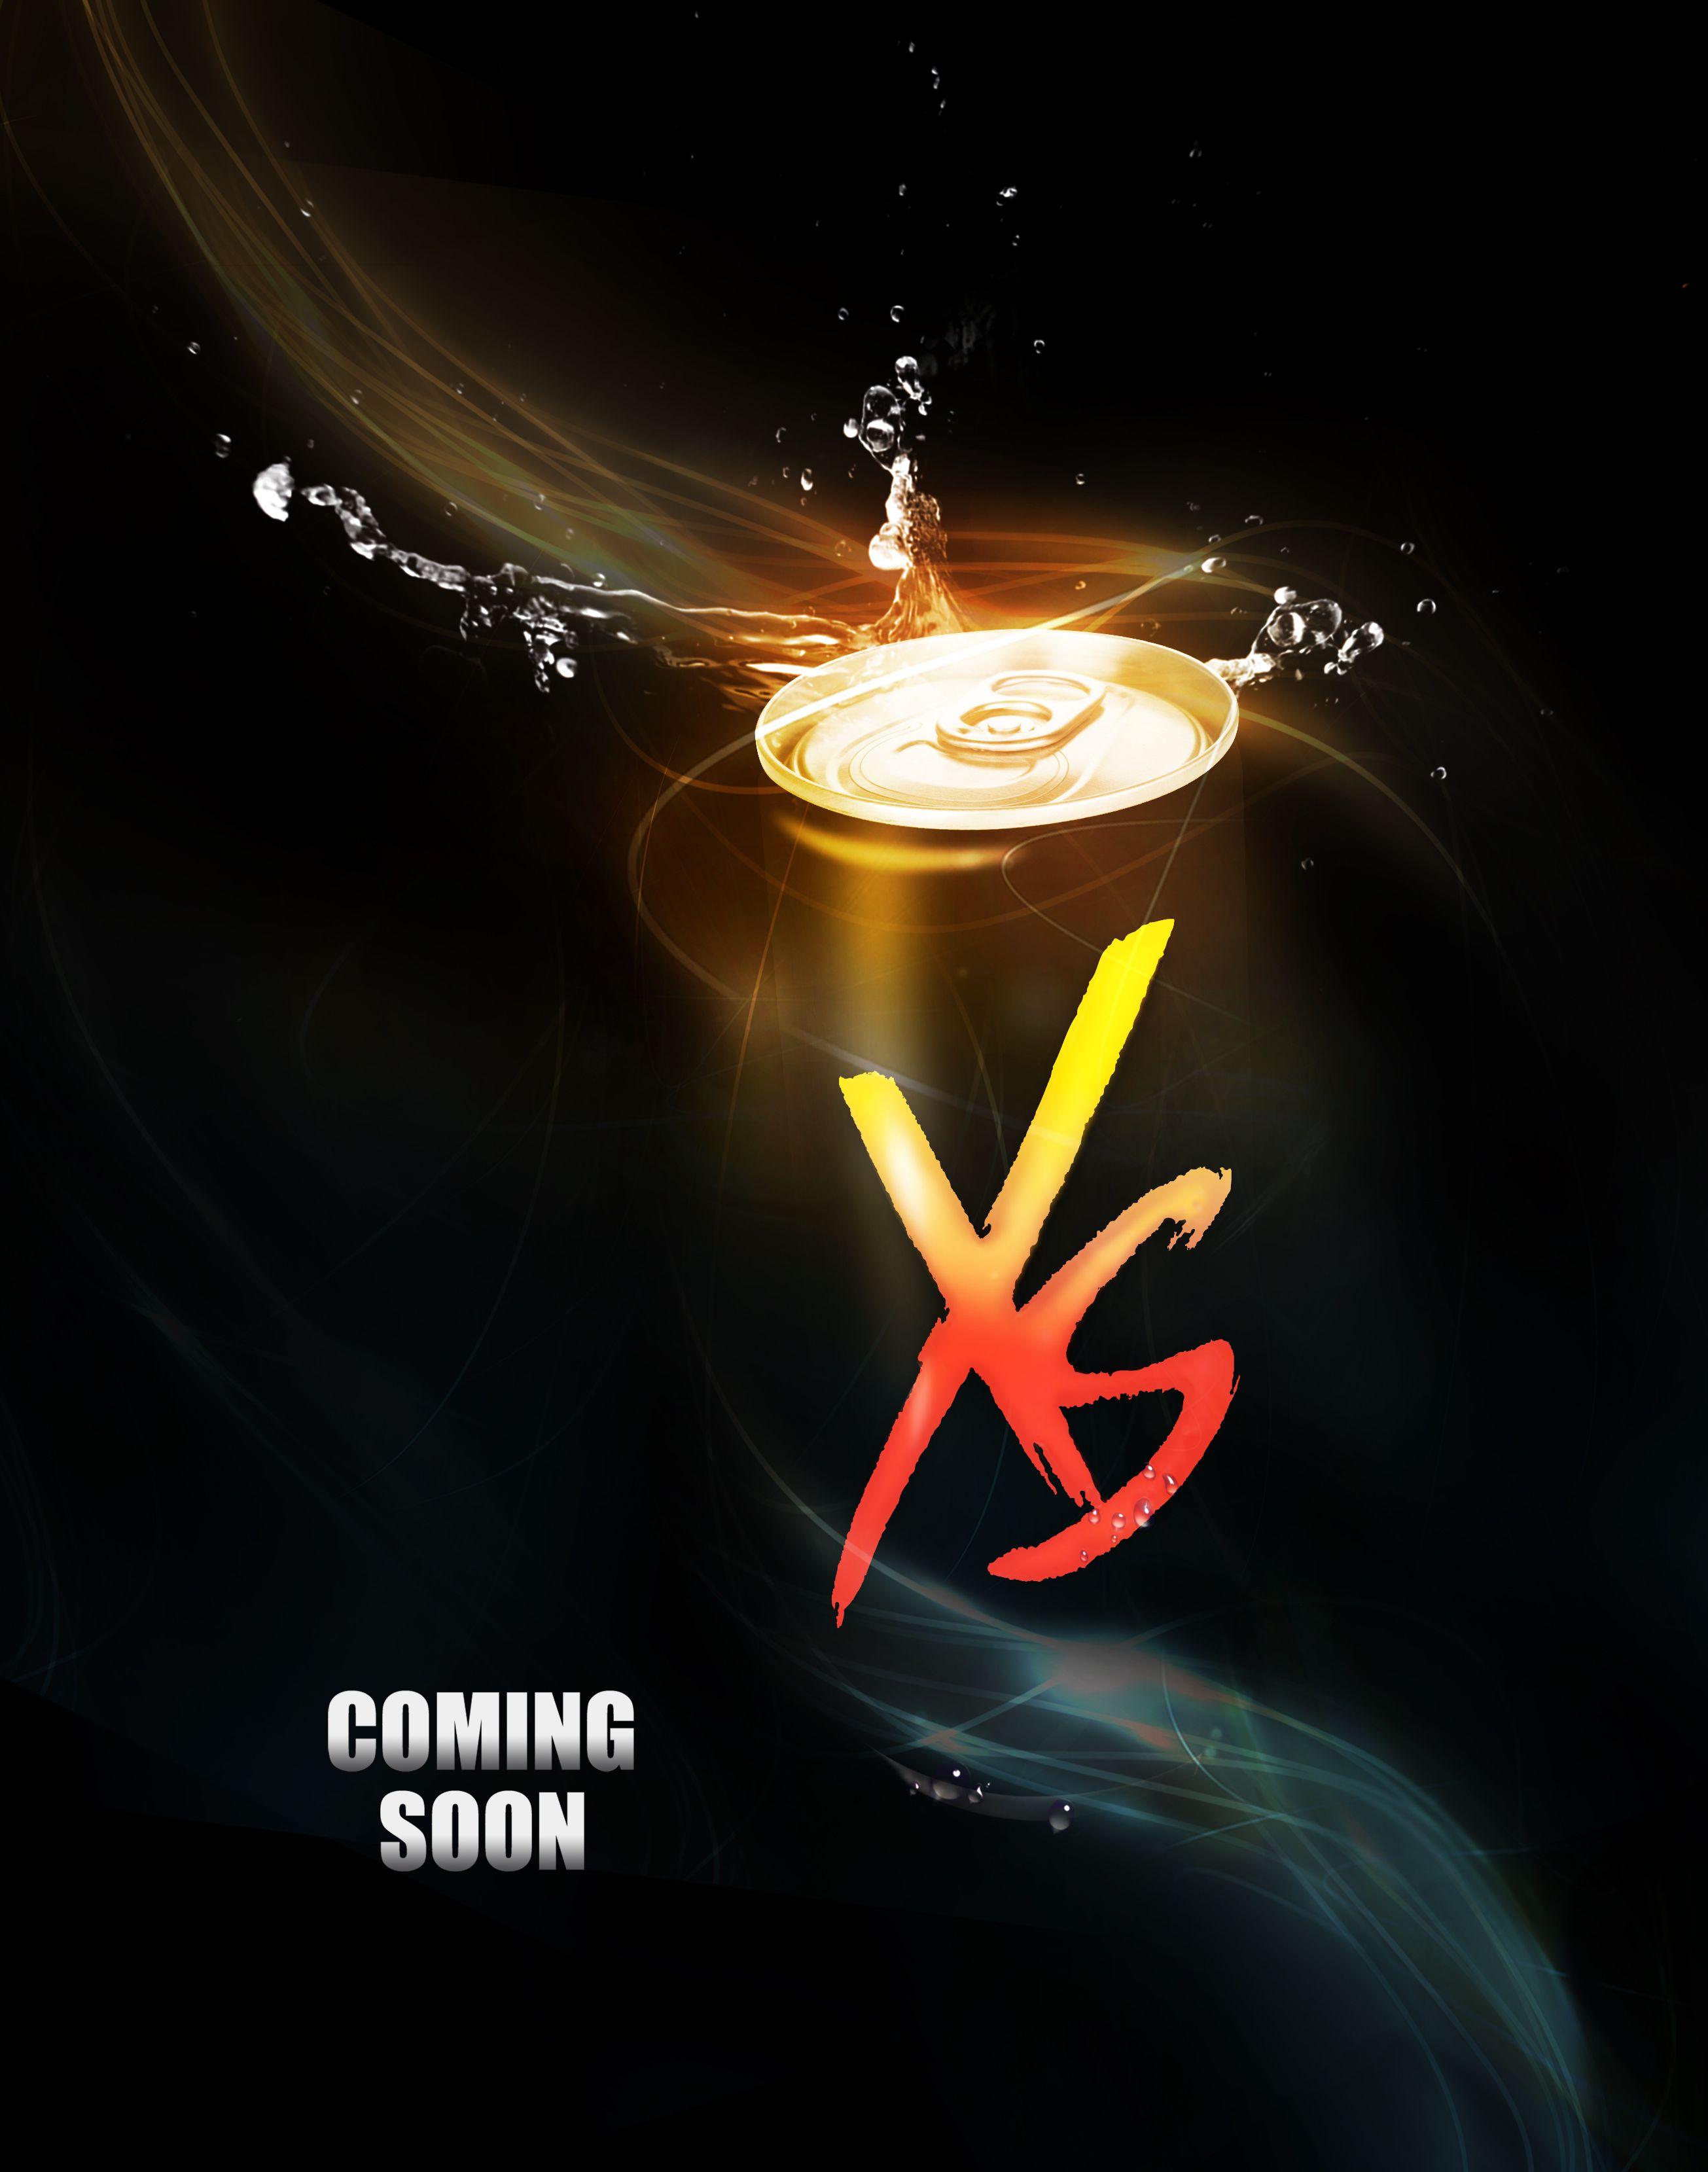 XS Energy Drink Logo - XS Energy Drink Teaser AD Design by gtl communication | Ryan's Amway ...